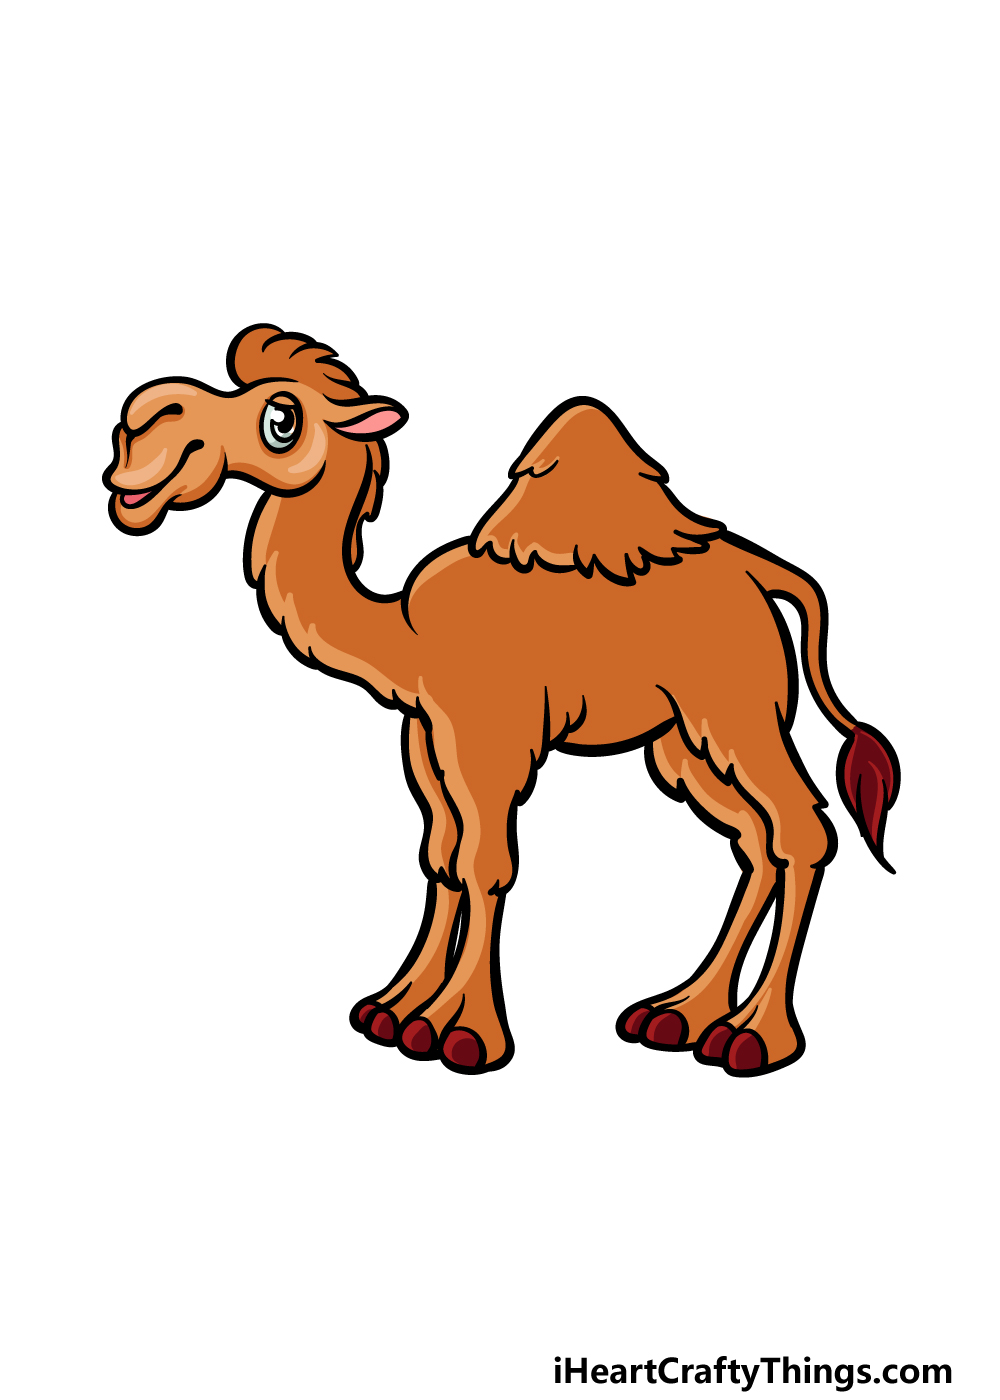 How to Draw a Camel for Kids - How to Draw Easy